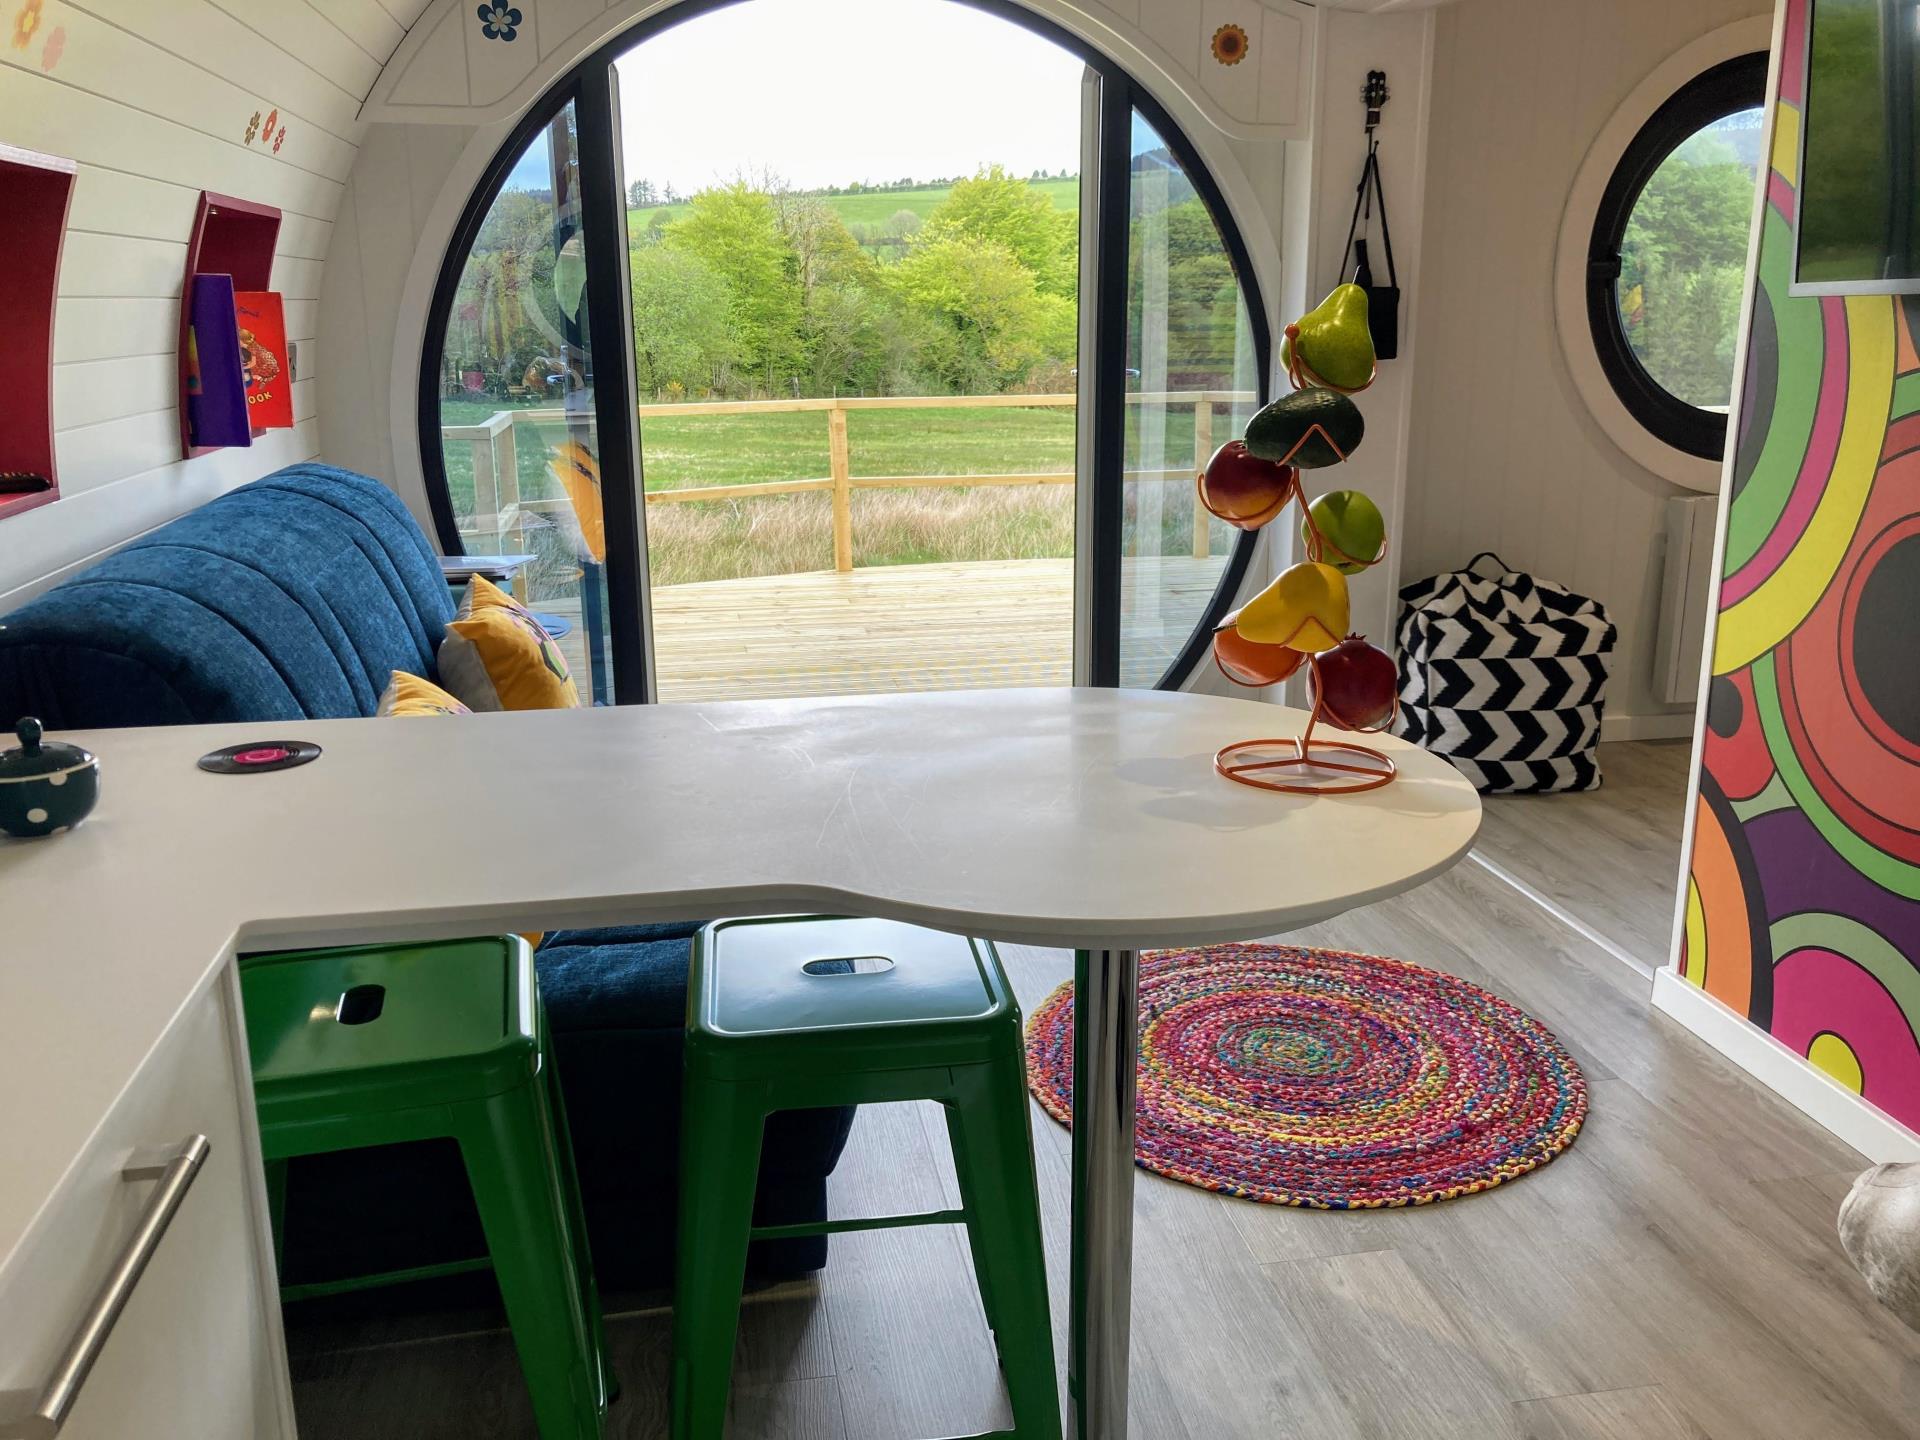 Let's Glamp Retro Luxury Glamping in West Wales 